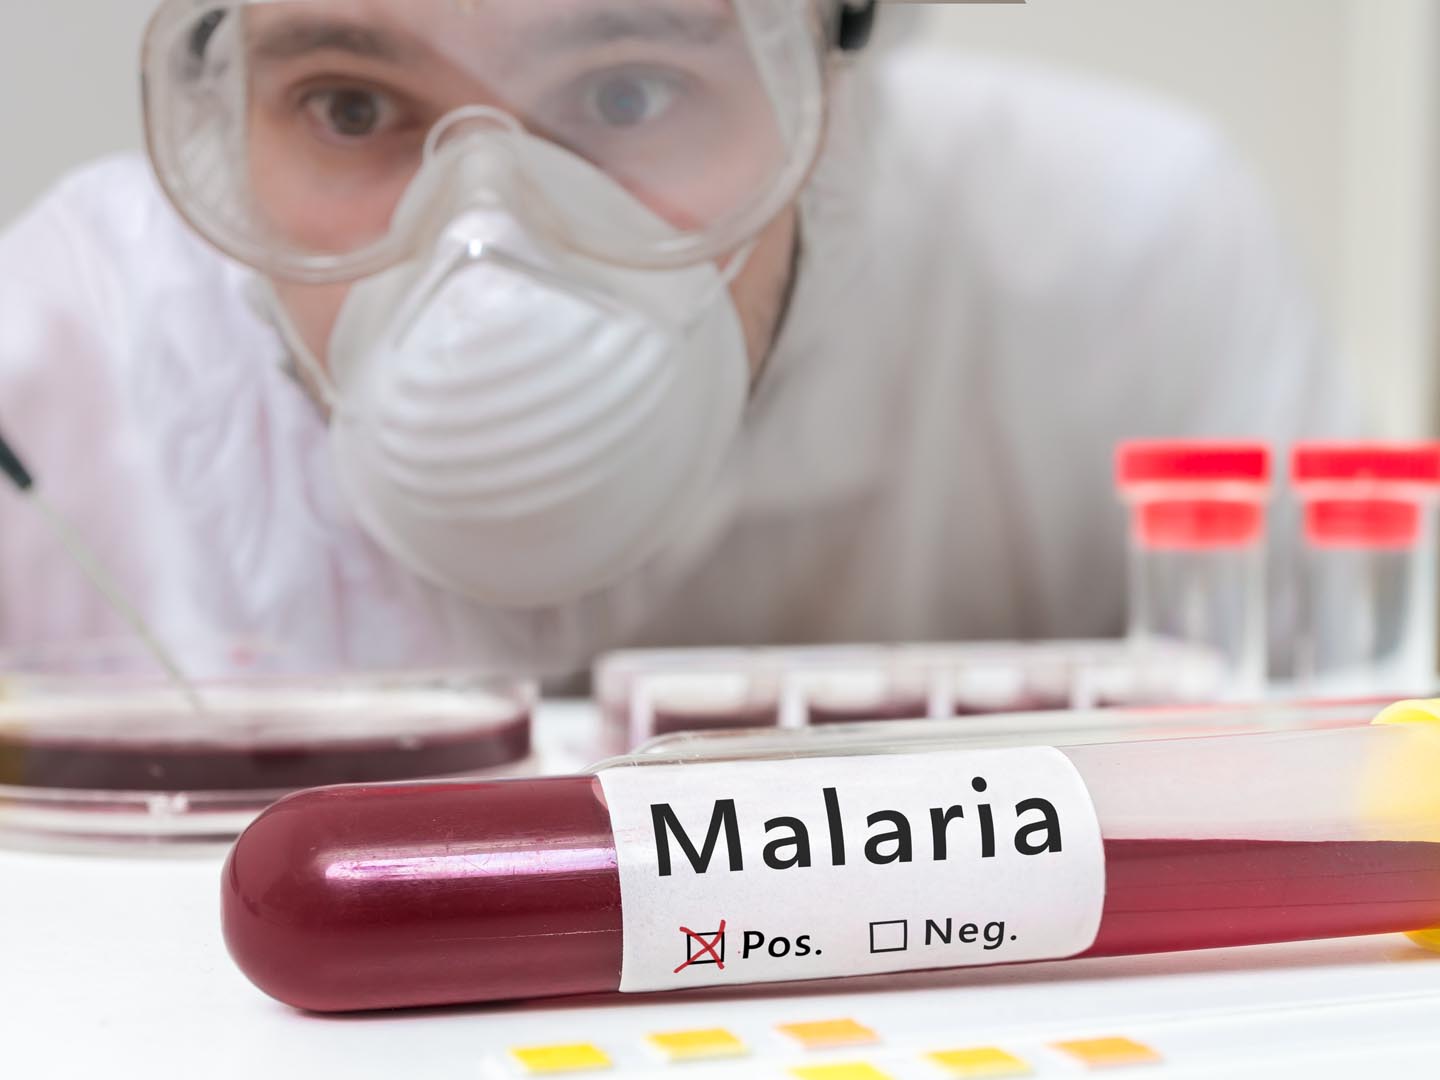 Researcher is analyzing test tube with Malaria.